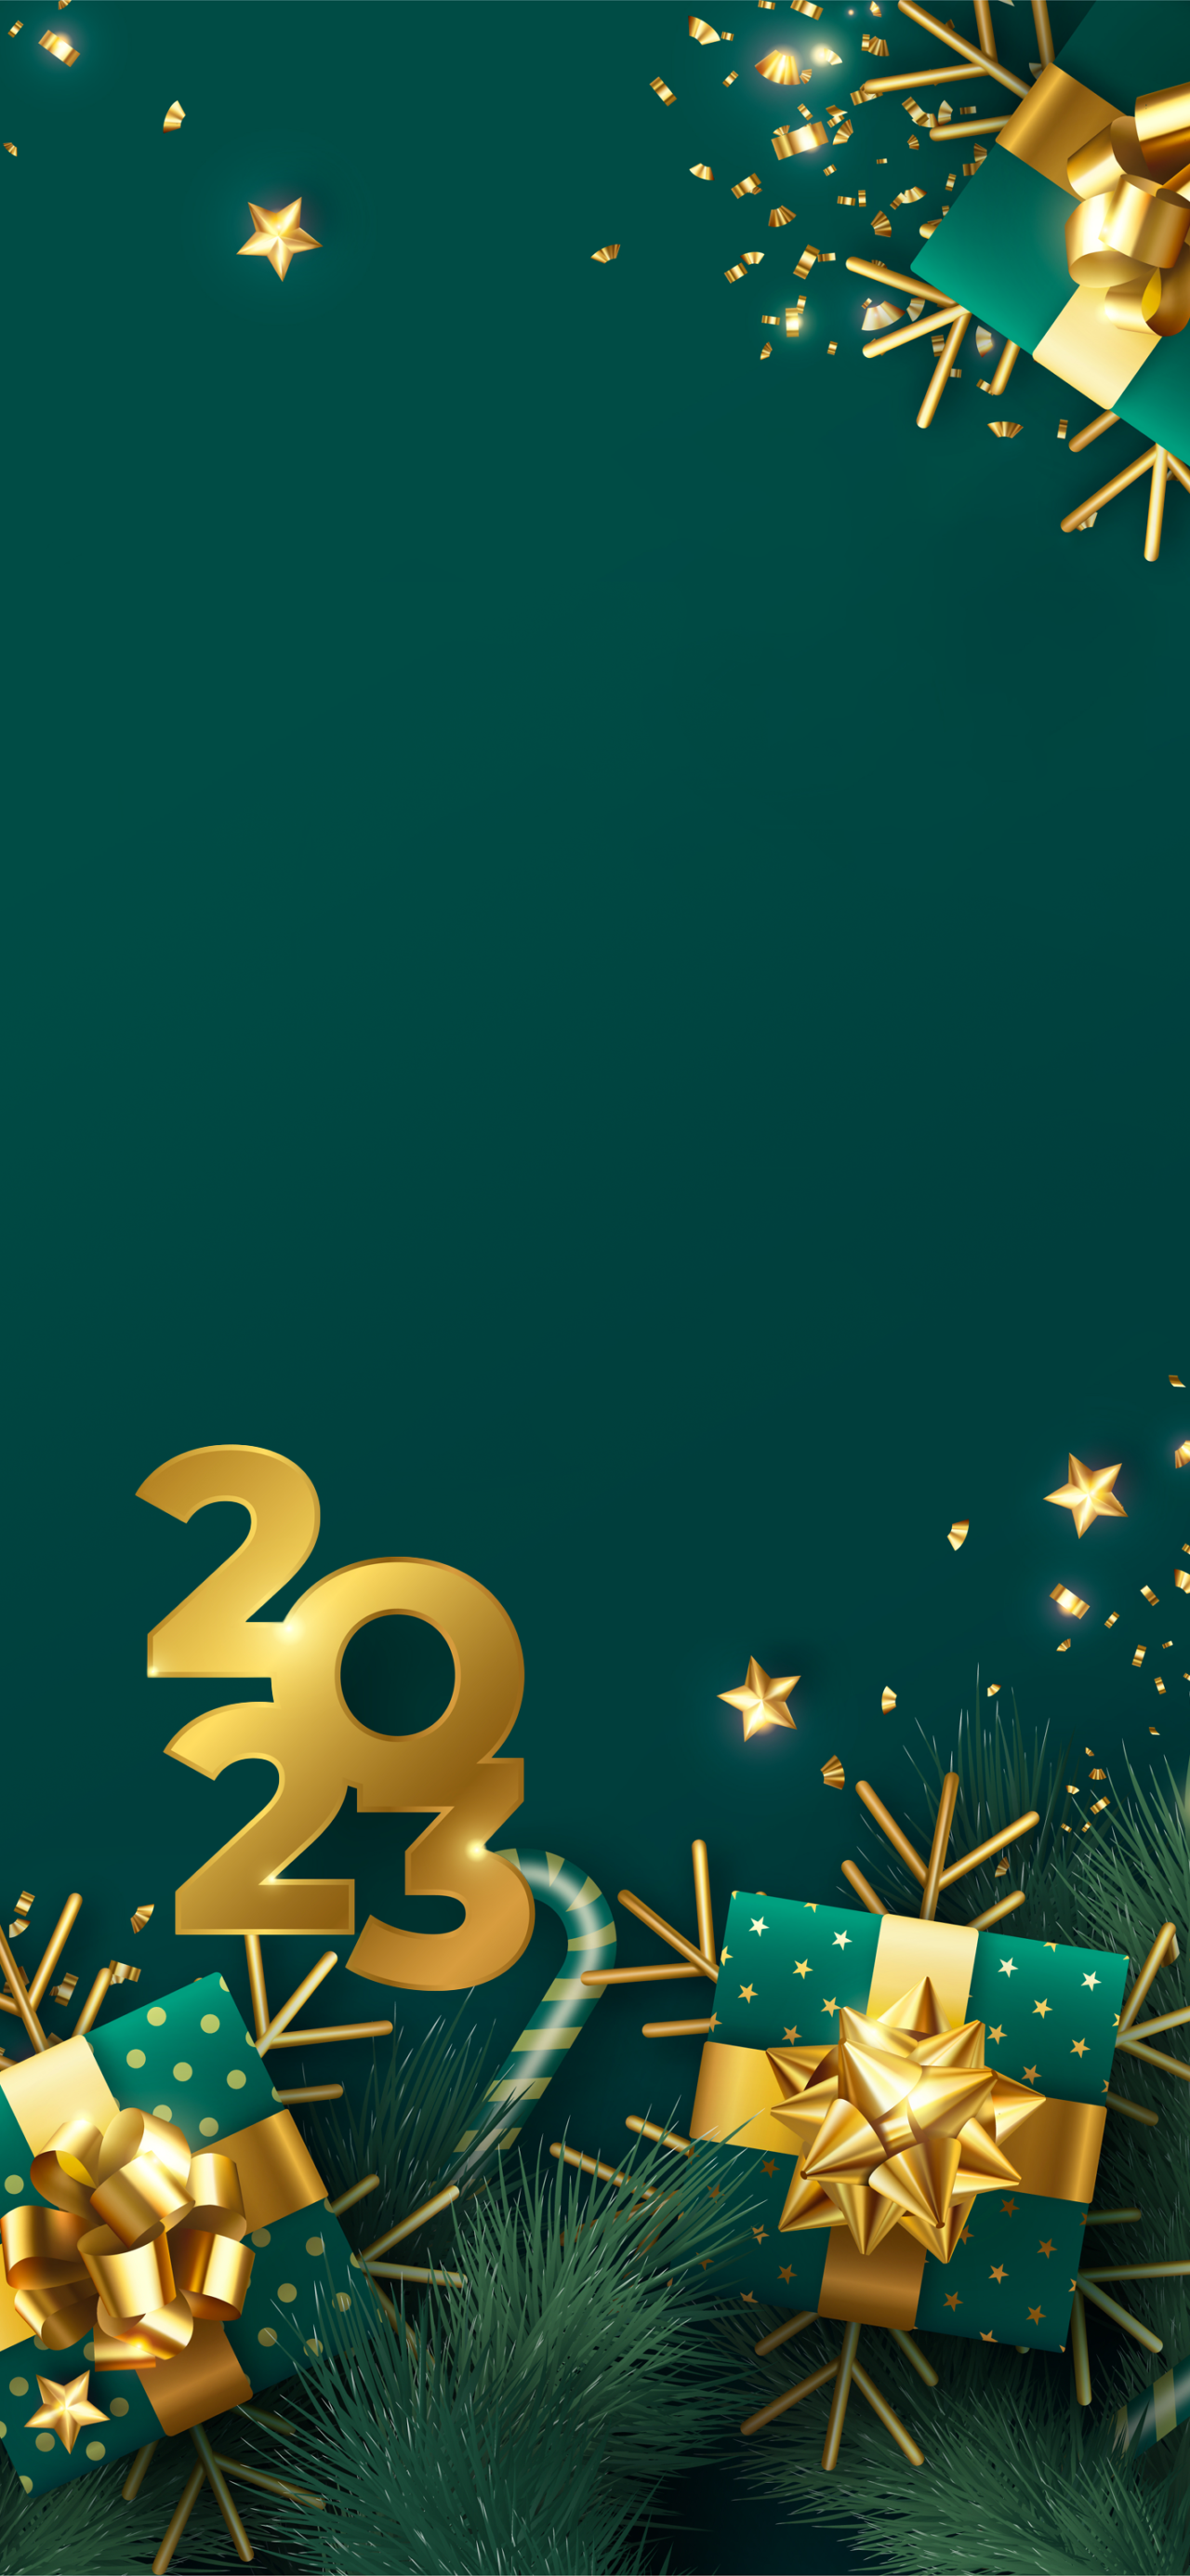 New year wallpapers hd, desktop backgrounds, images and pictures